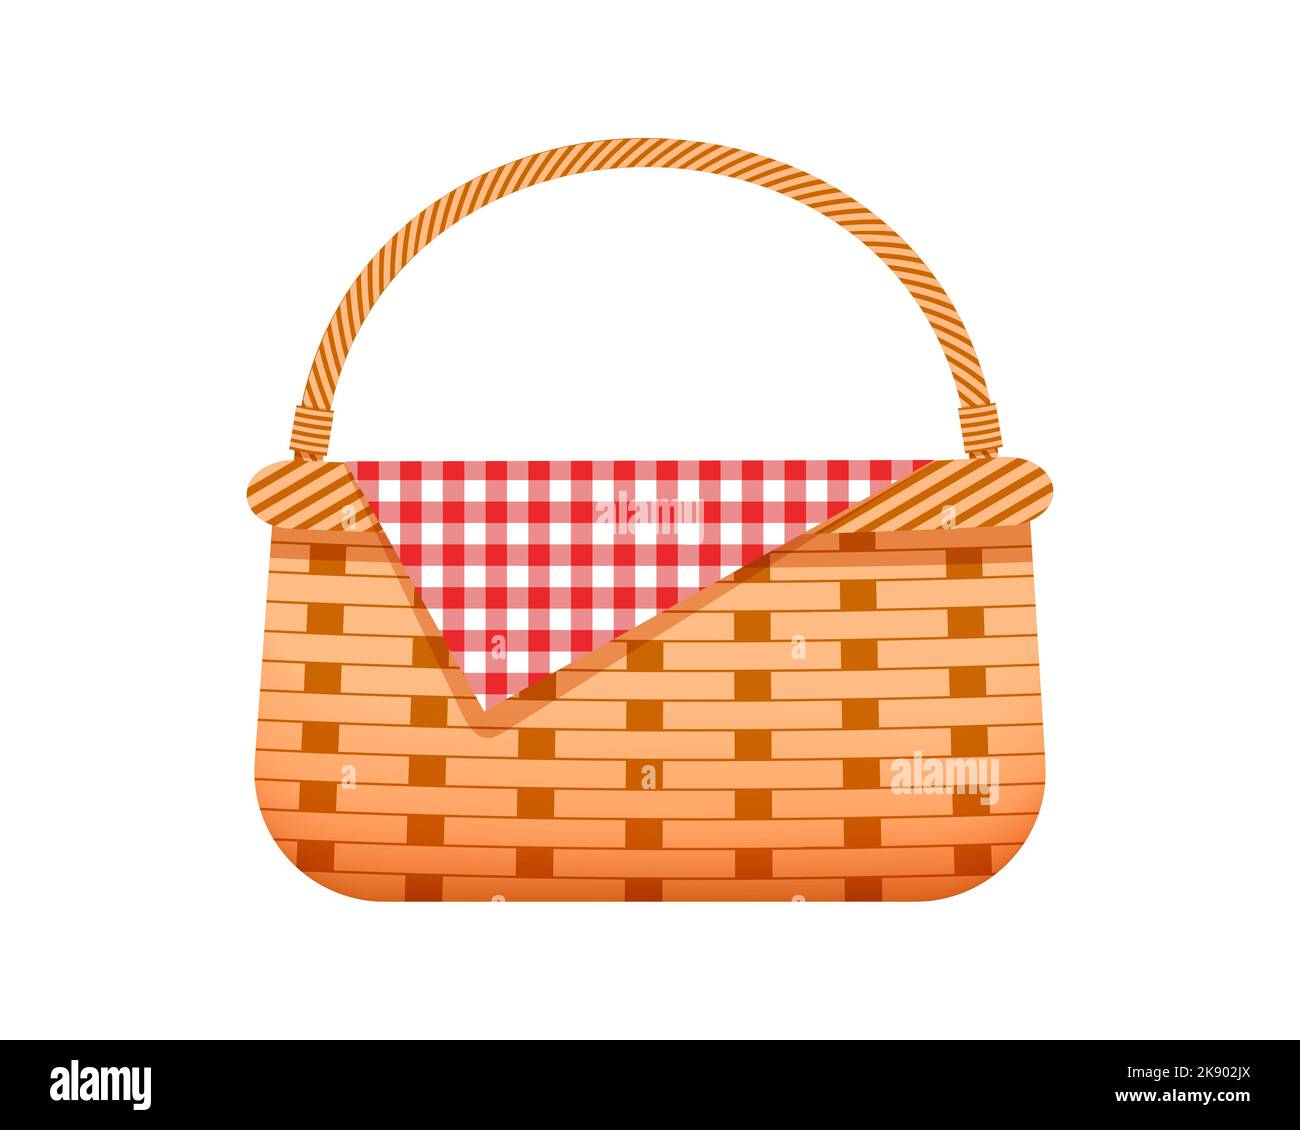 Empty wicker picnic basket with checkered cloth napkin. Hand woven willow hamper isolated on white background. Vector cartoon illustration. Stock Vector